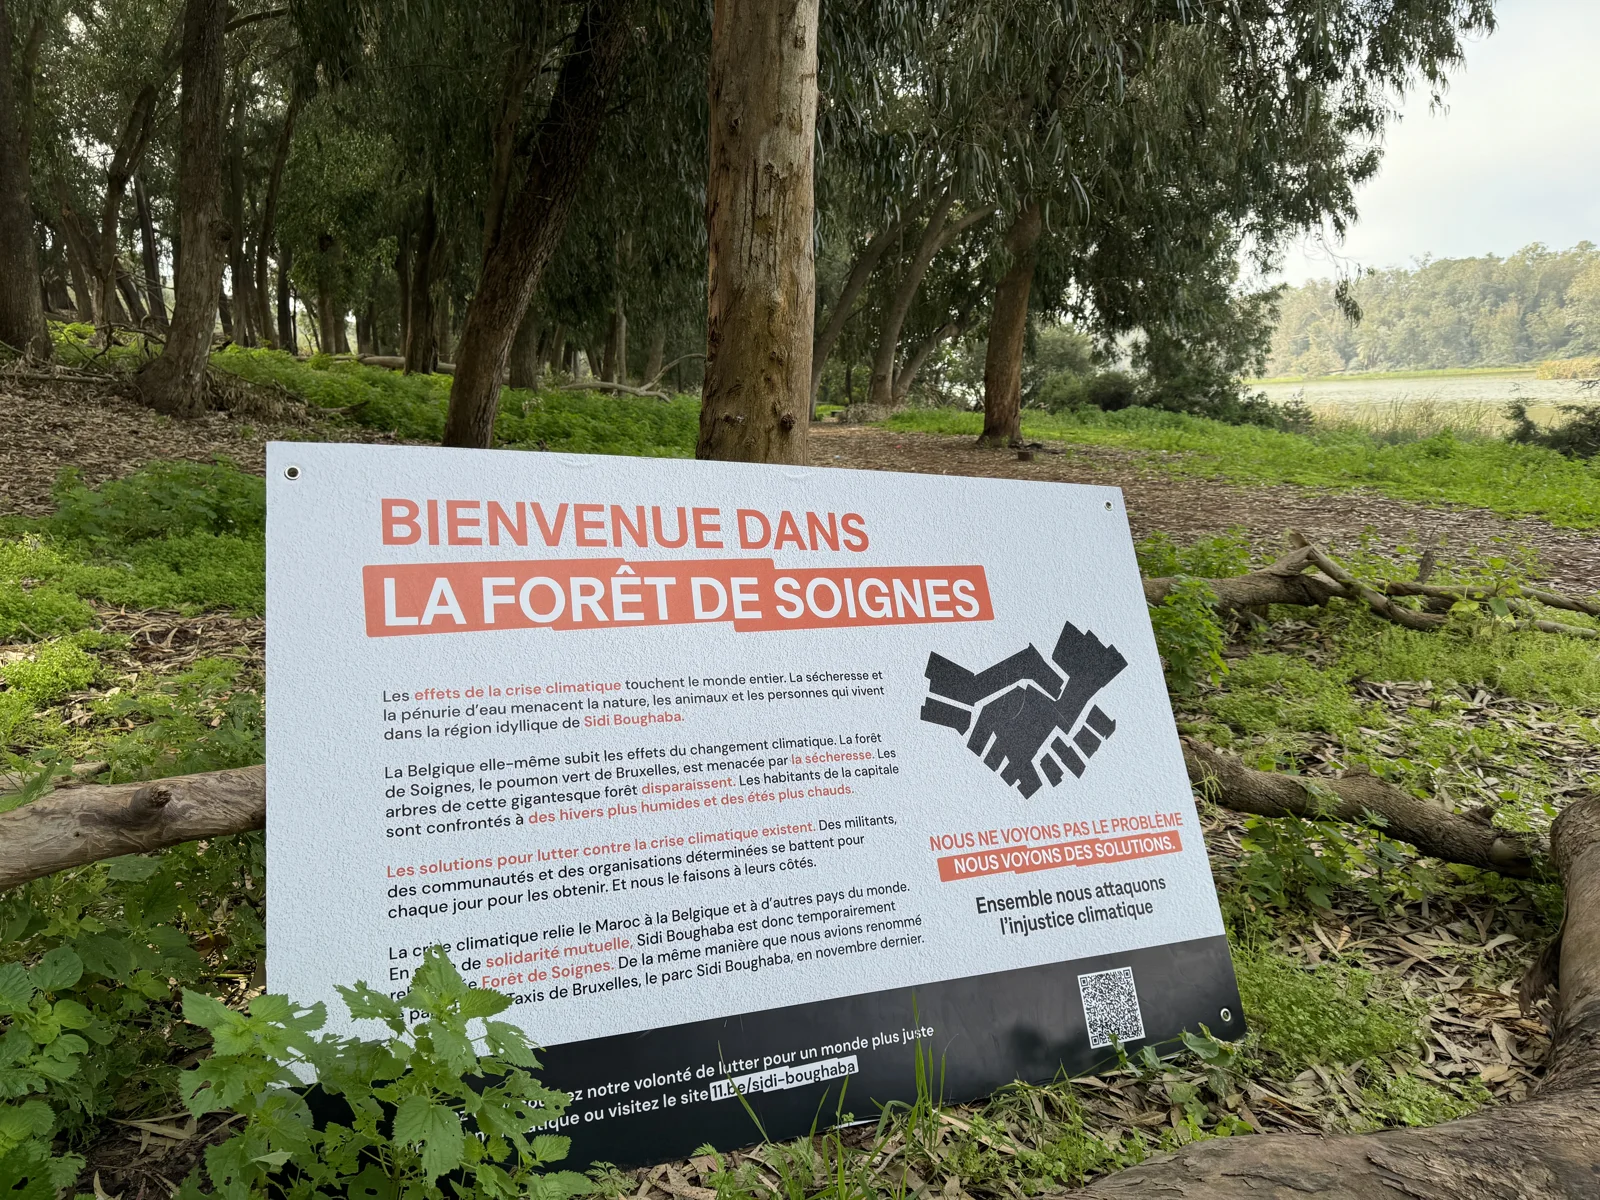 A sign in front of a forest welcomes visitors to the Sonian Forest.